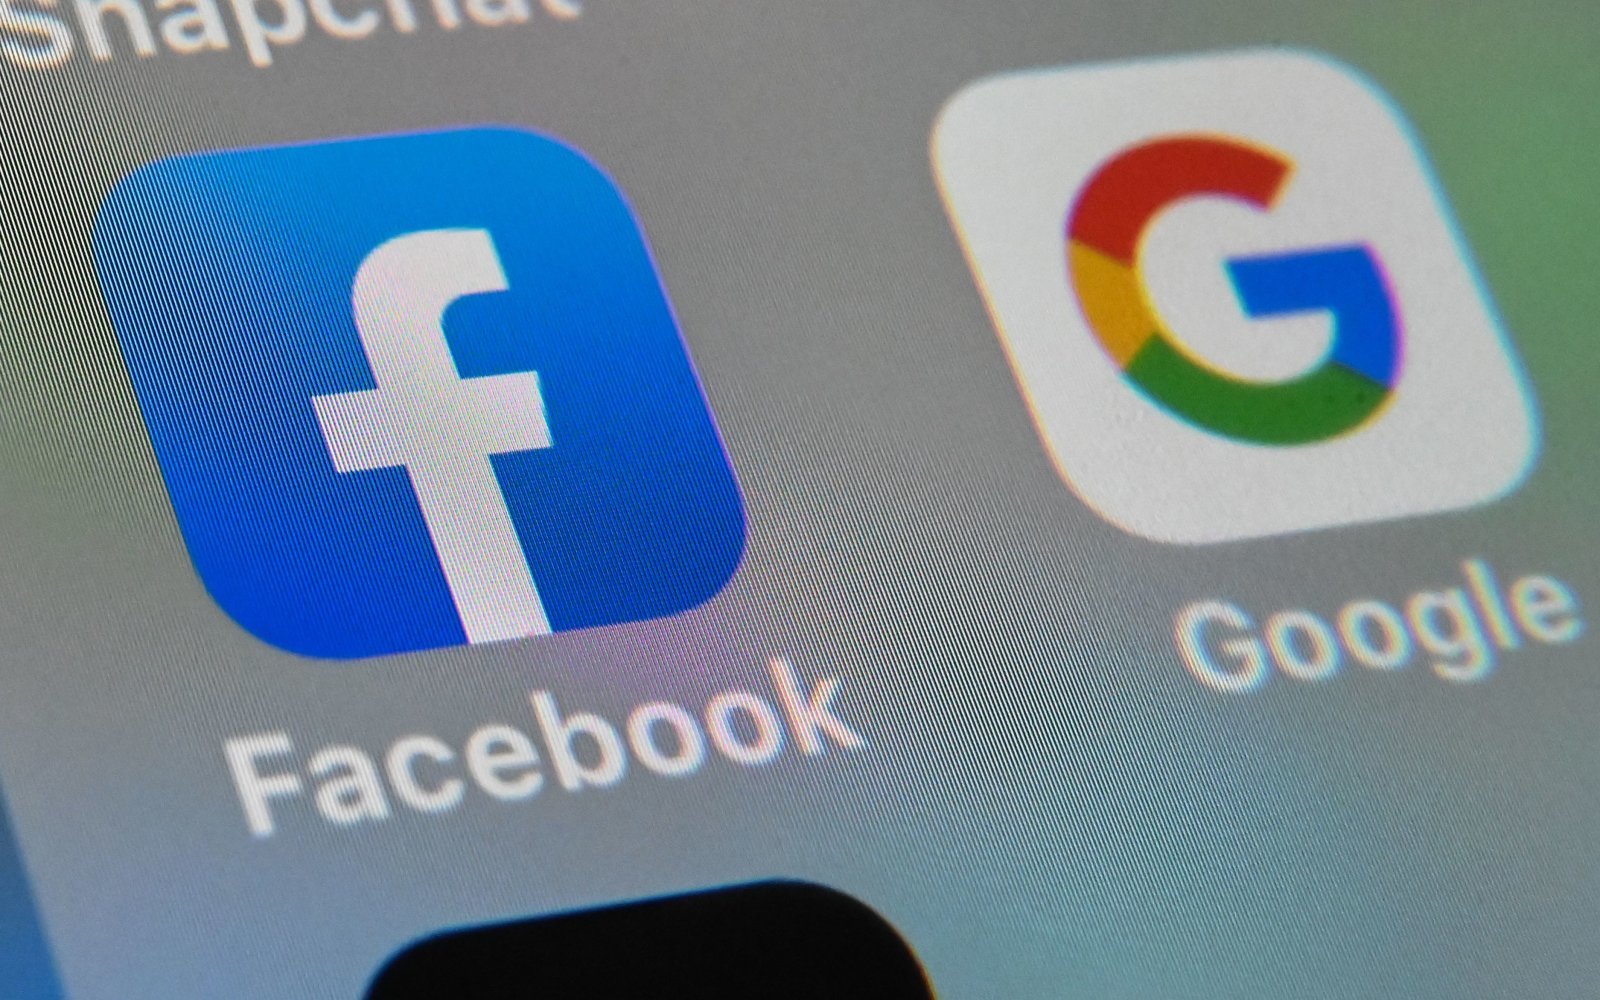 Facebook and Google a "threat" to human rights?